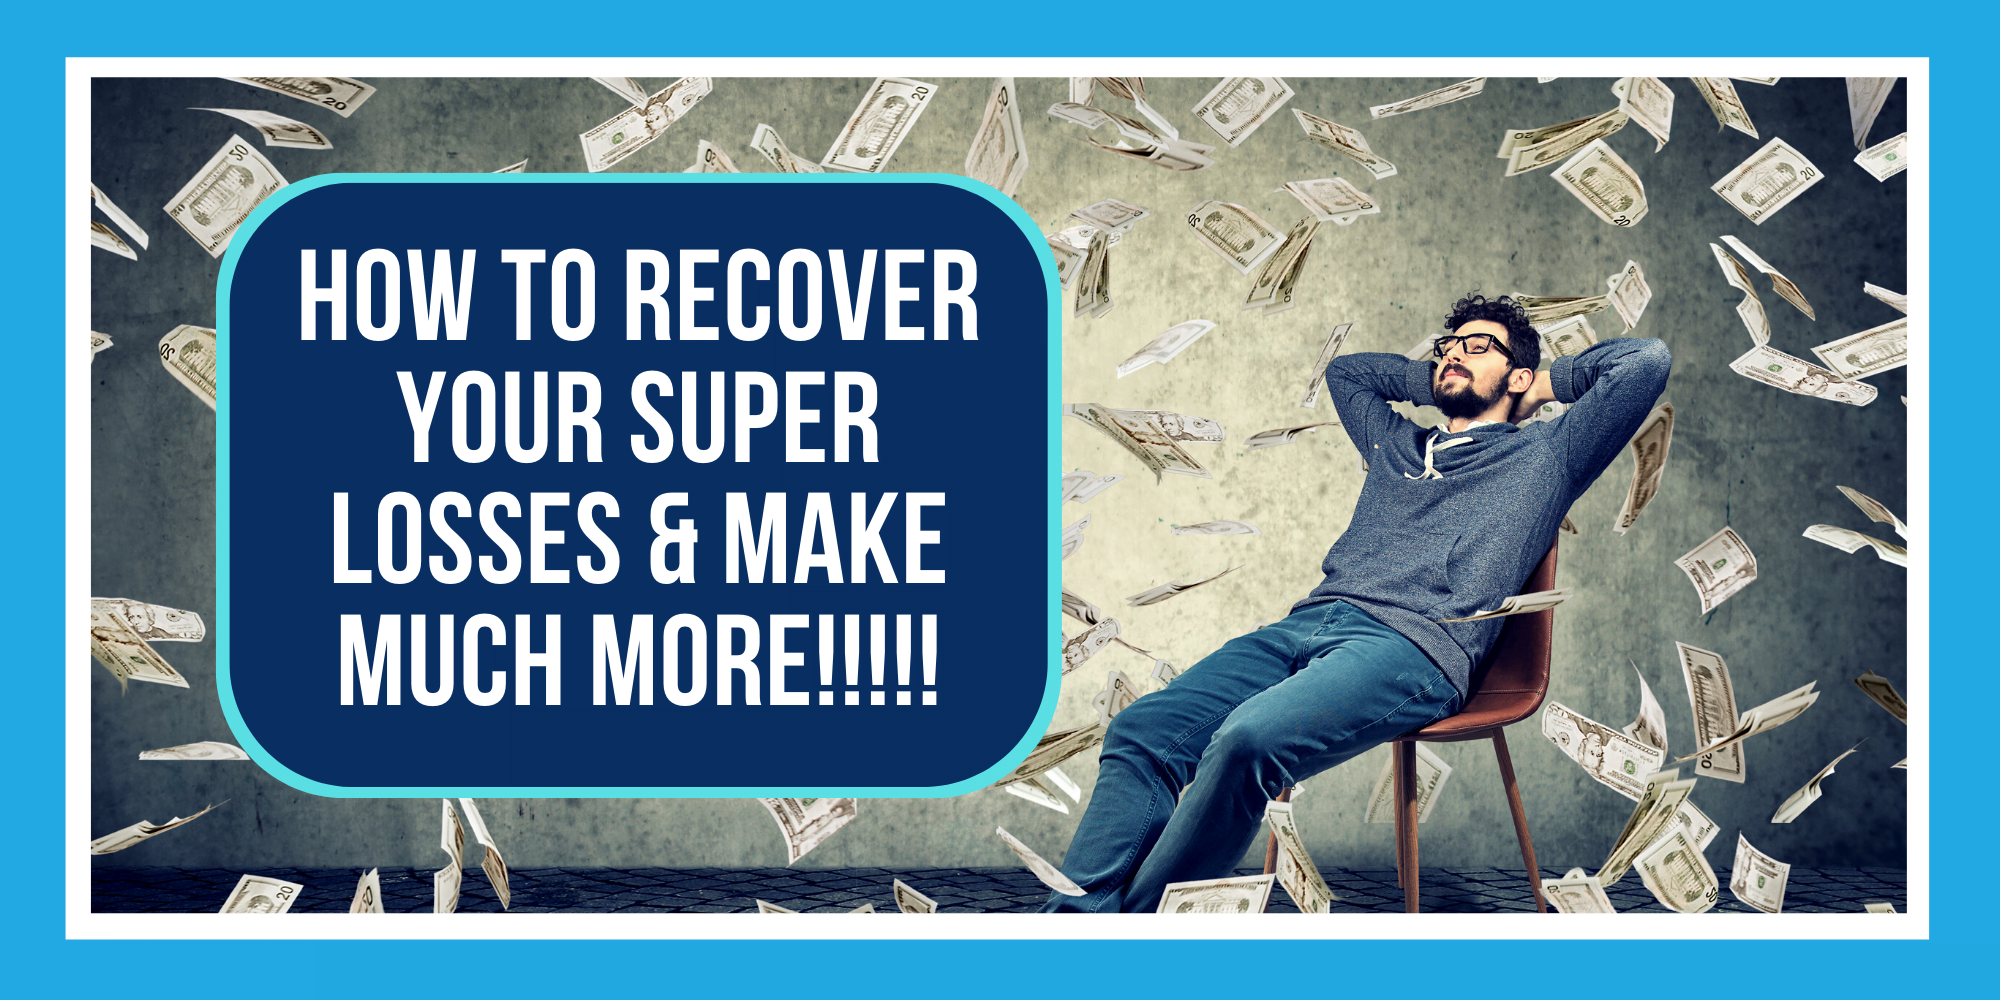 How to recover your recent super losses